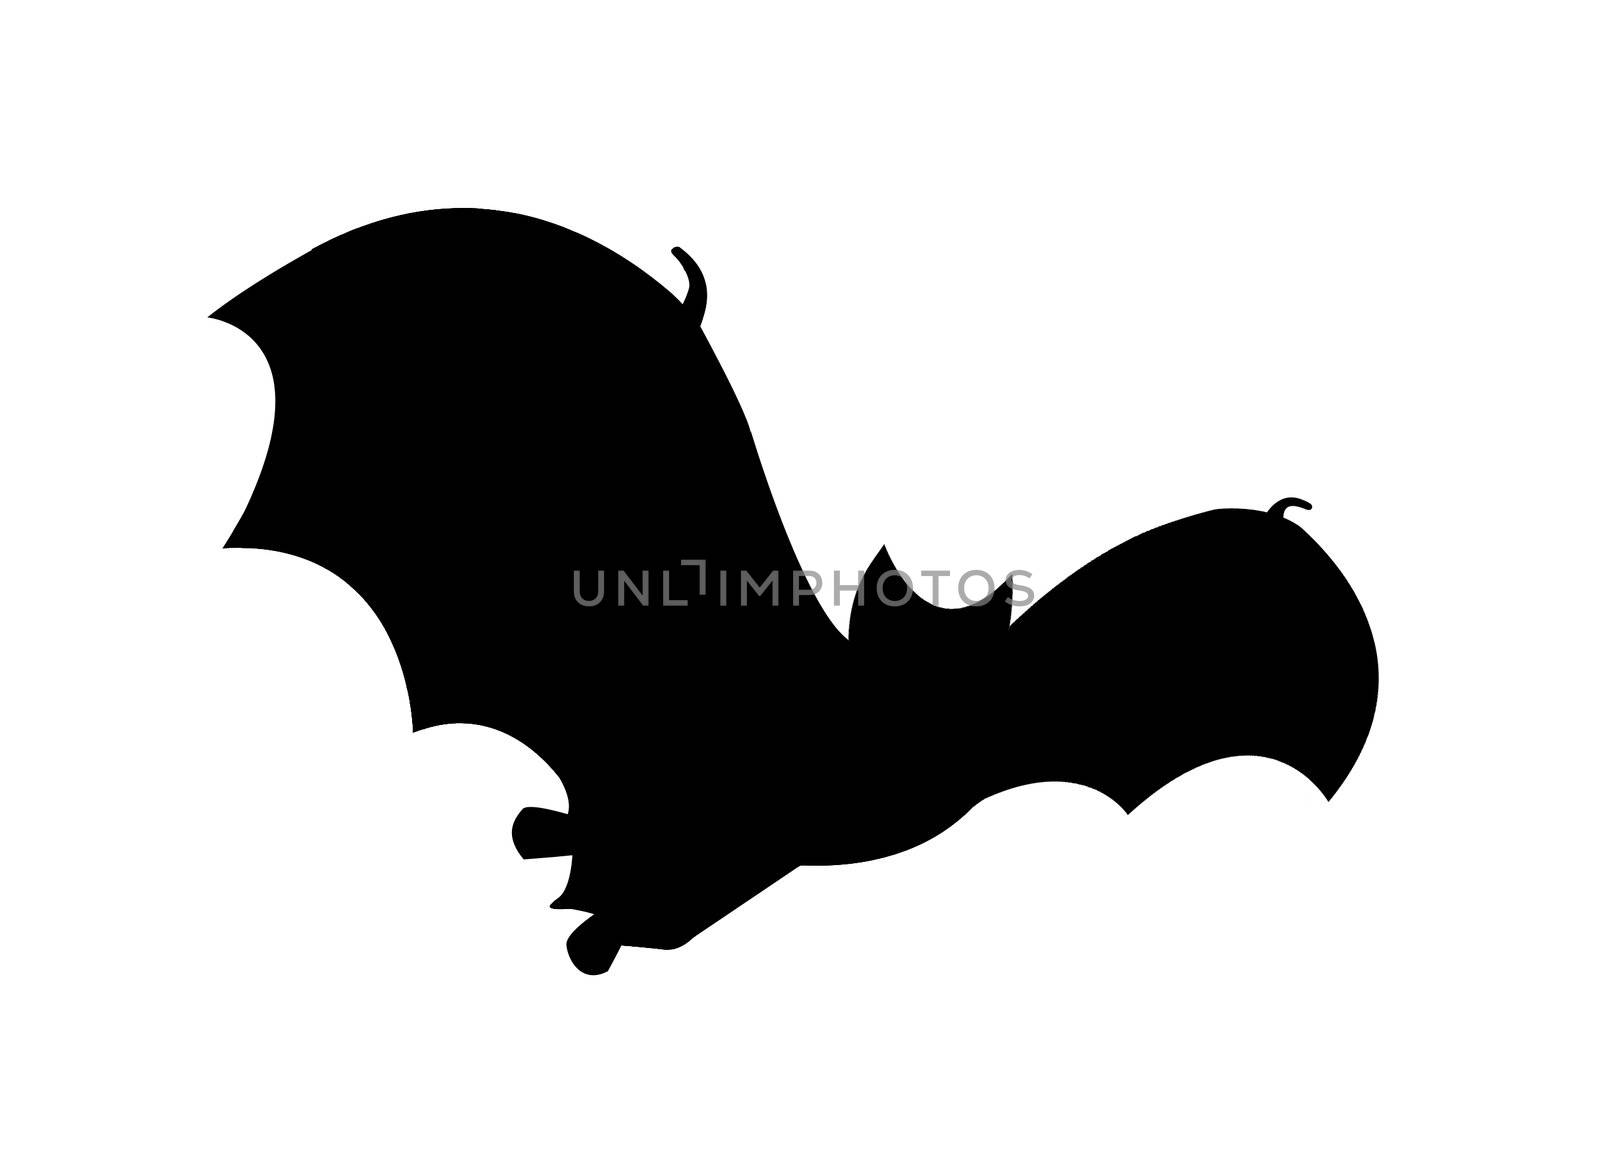 Simple silhouette drawing illustration clip art of a bat in flight, great Halloween symbol.